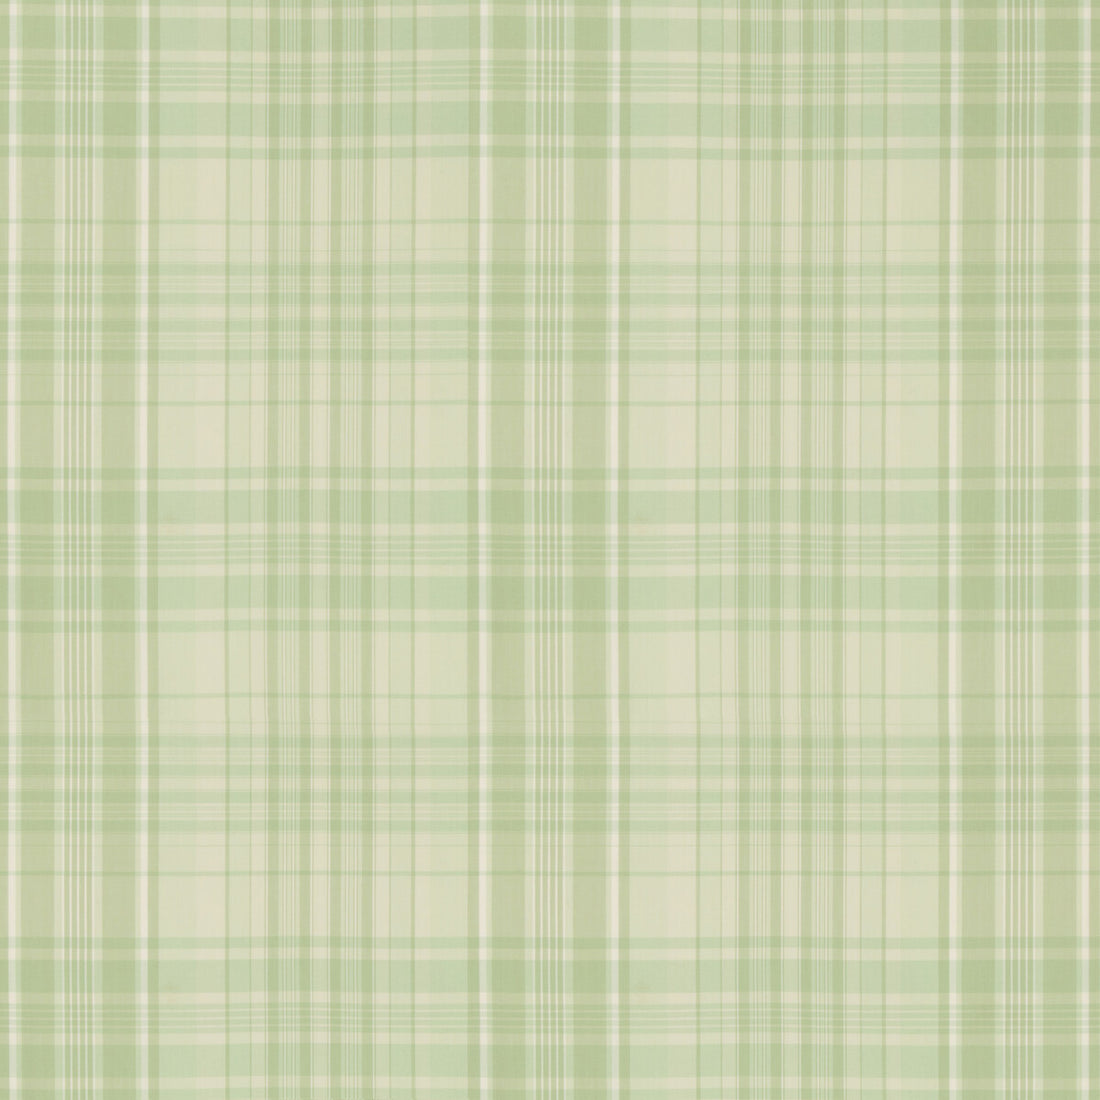 Guernsey Check fabric in celery color - pattern 8019101.23.0 - by Brunschwig &amp; Fils in the Normant Checks And Stripes collection